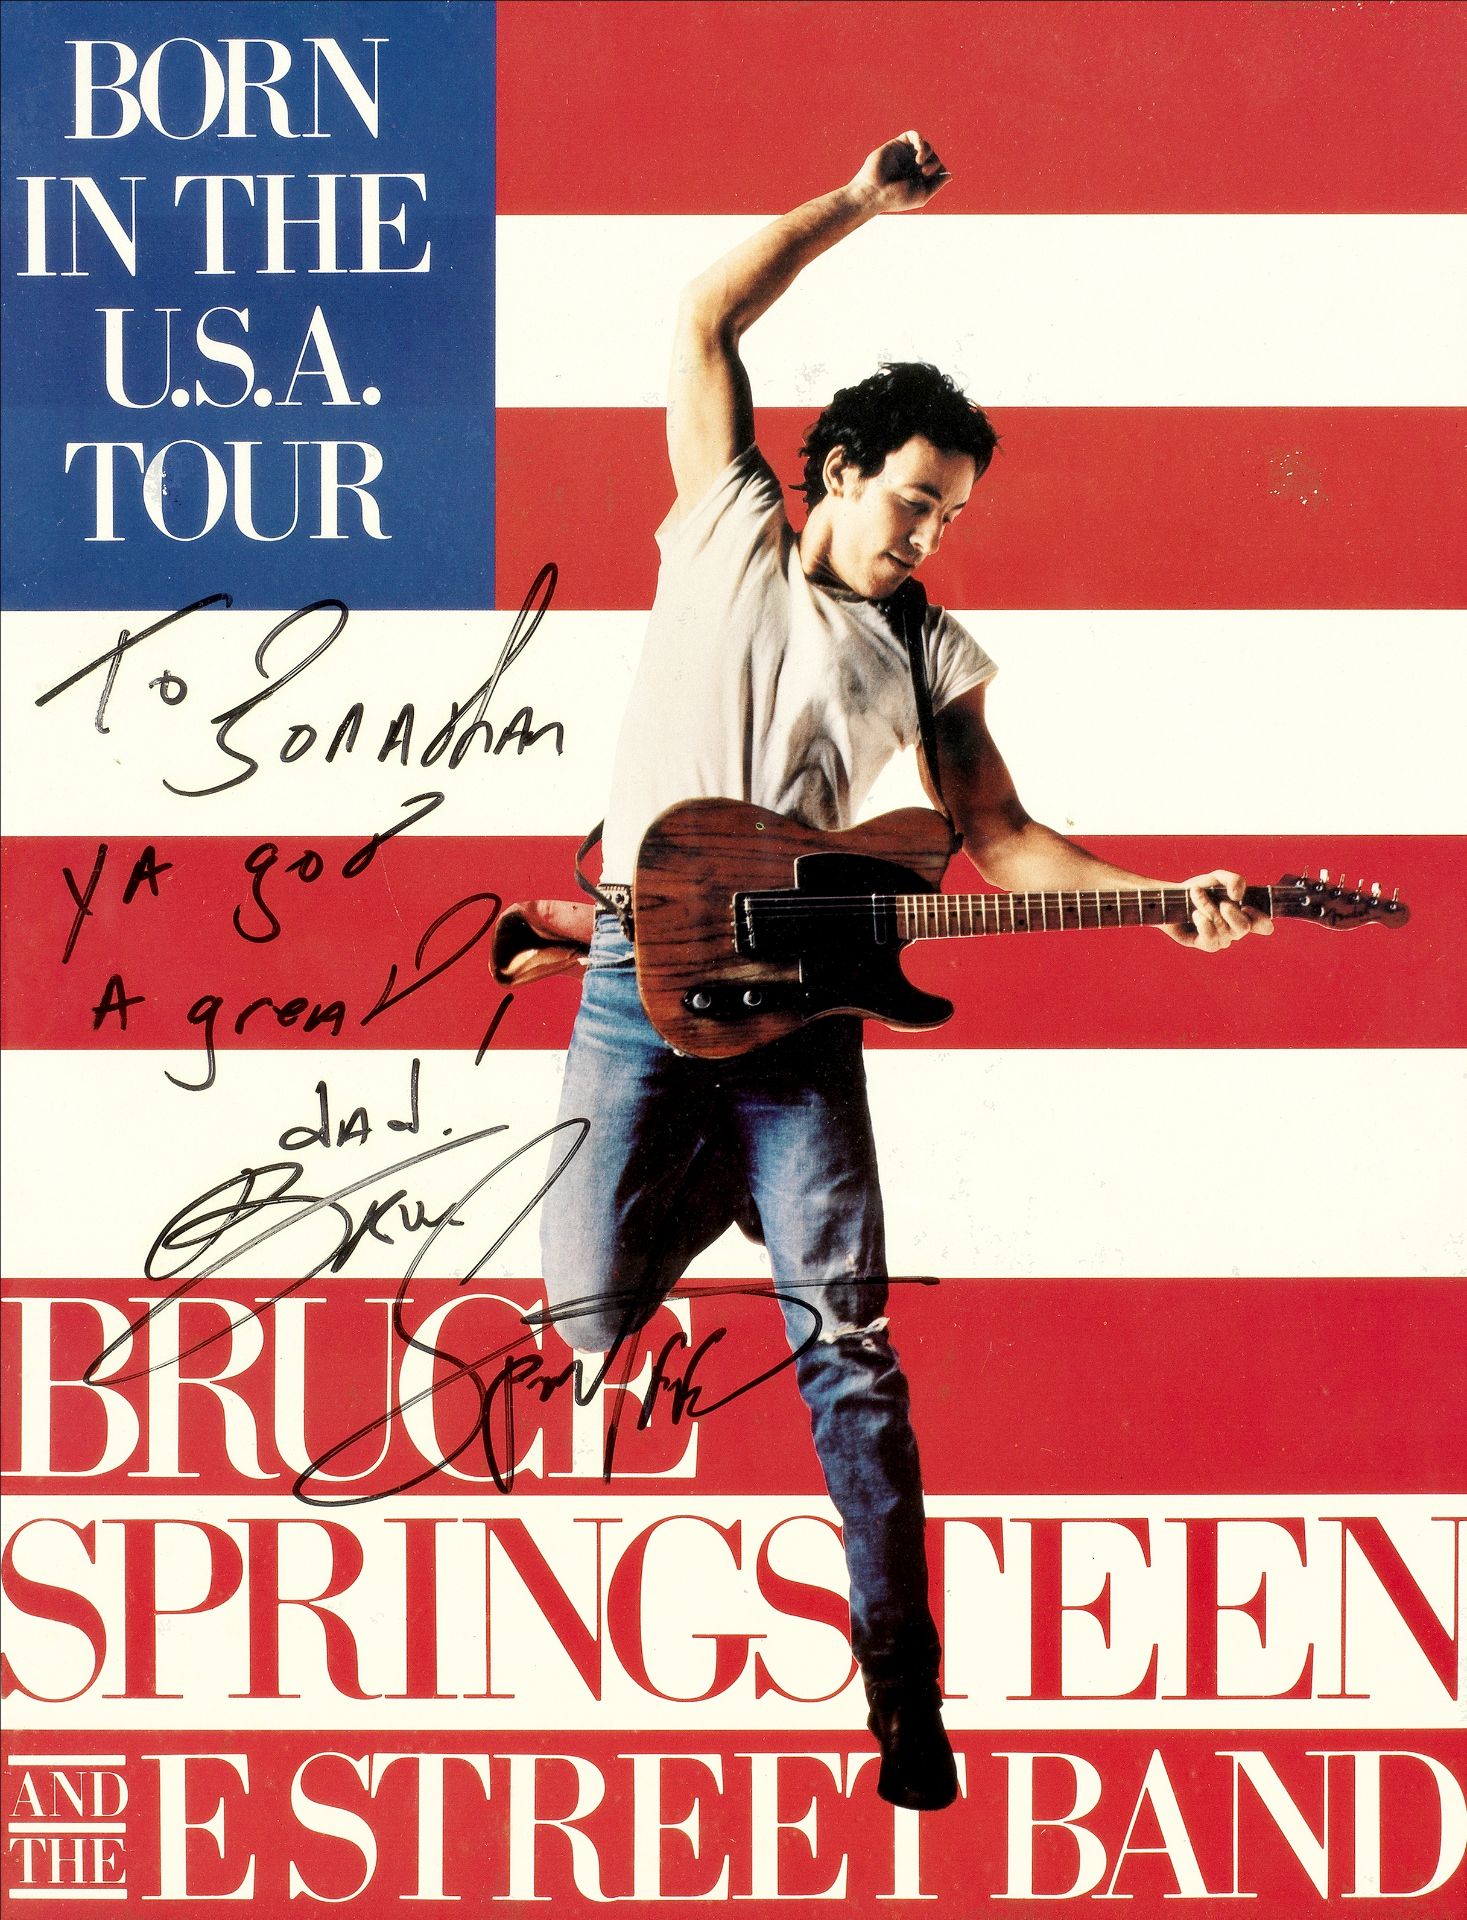 Bruce Springsteen: A signed tour poster for Born in the USA, 1994-1995,